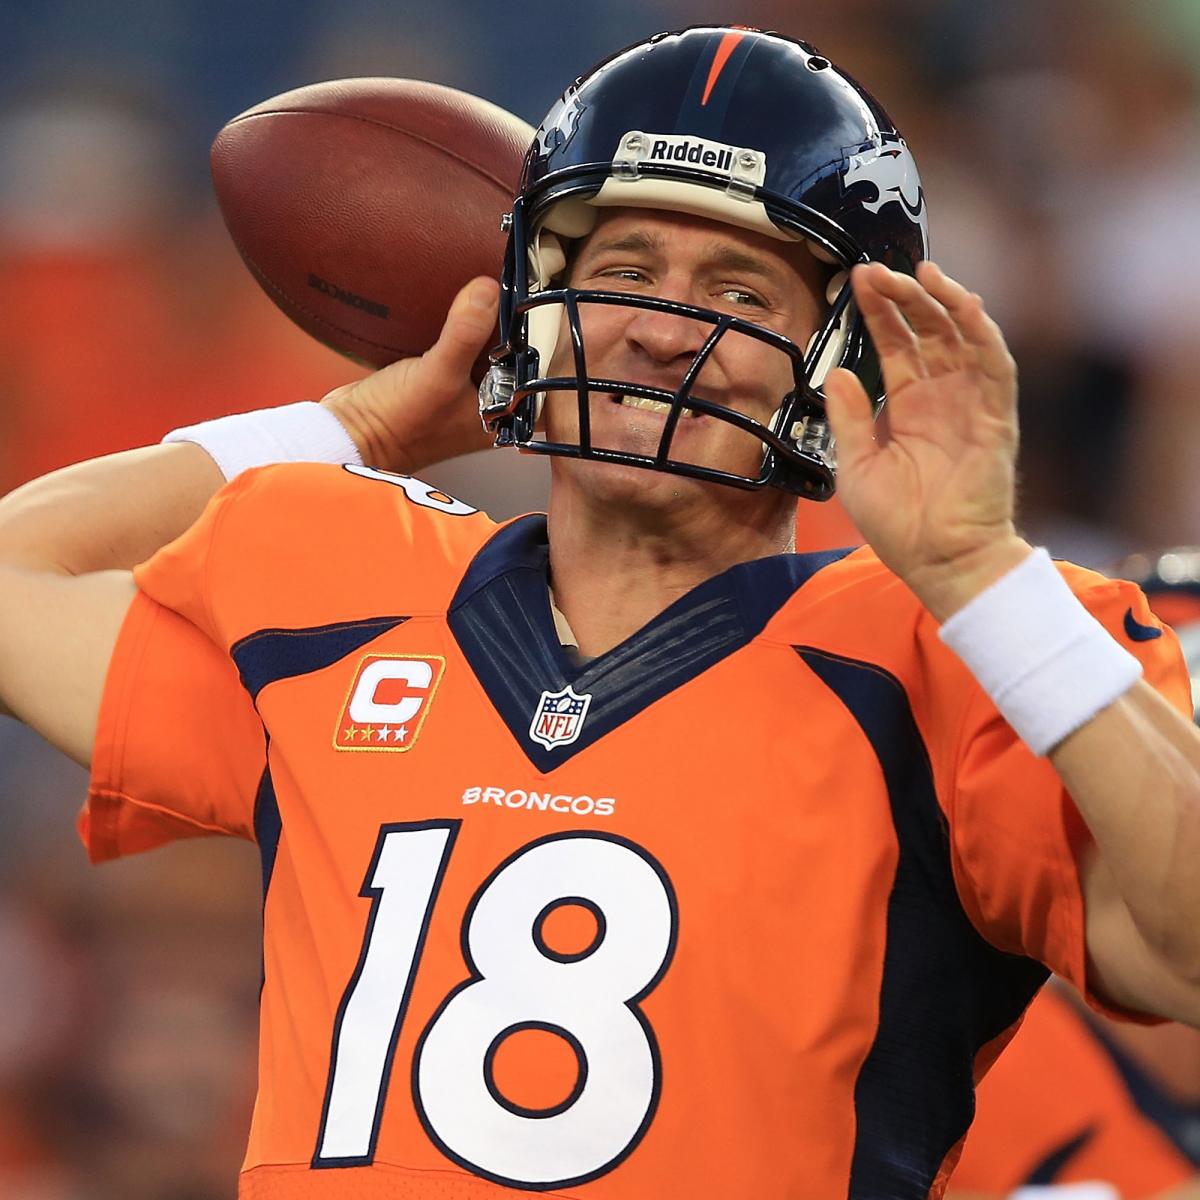 Peyton Manning Ties NFL Record with 7 Touchdowns Against Baltimore